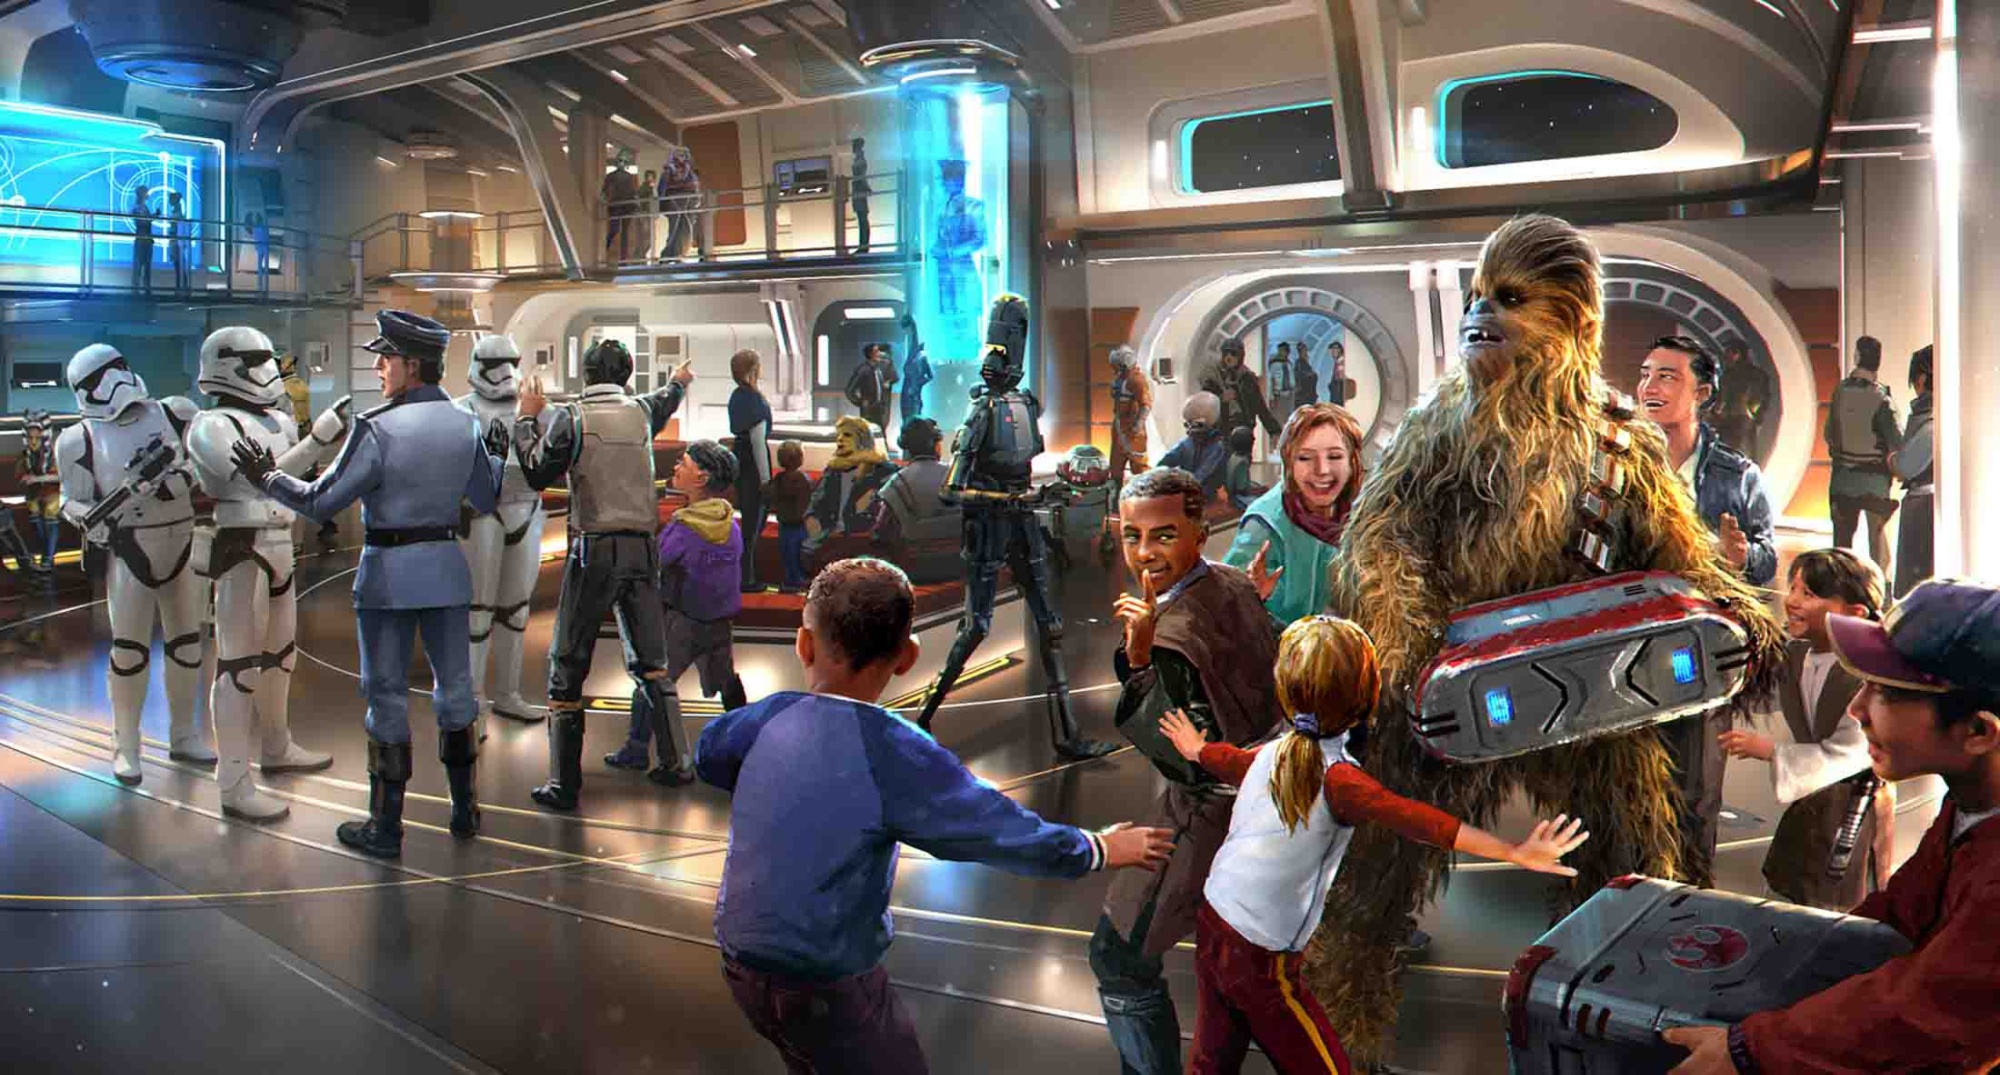 Guests will step into a bustling atrium when they arrive aboard Star Wars: Galactic Starcruiser